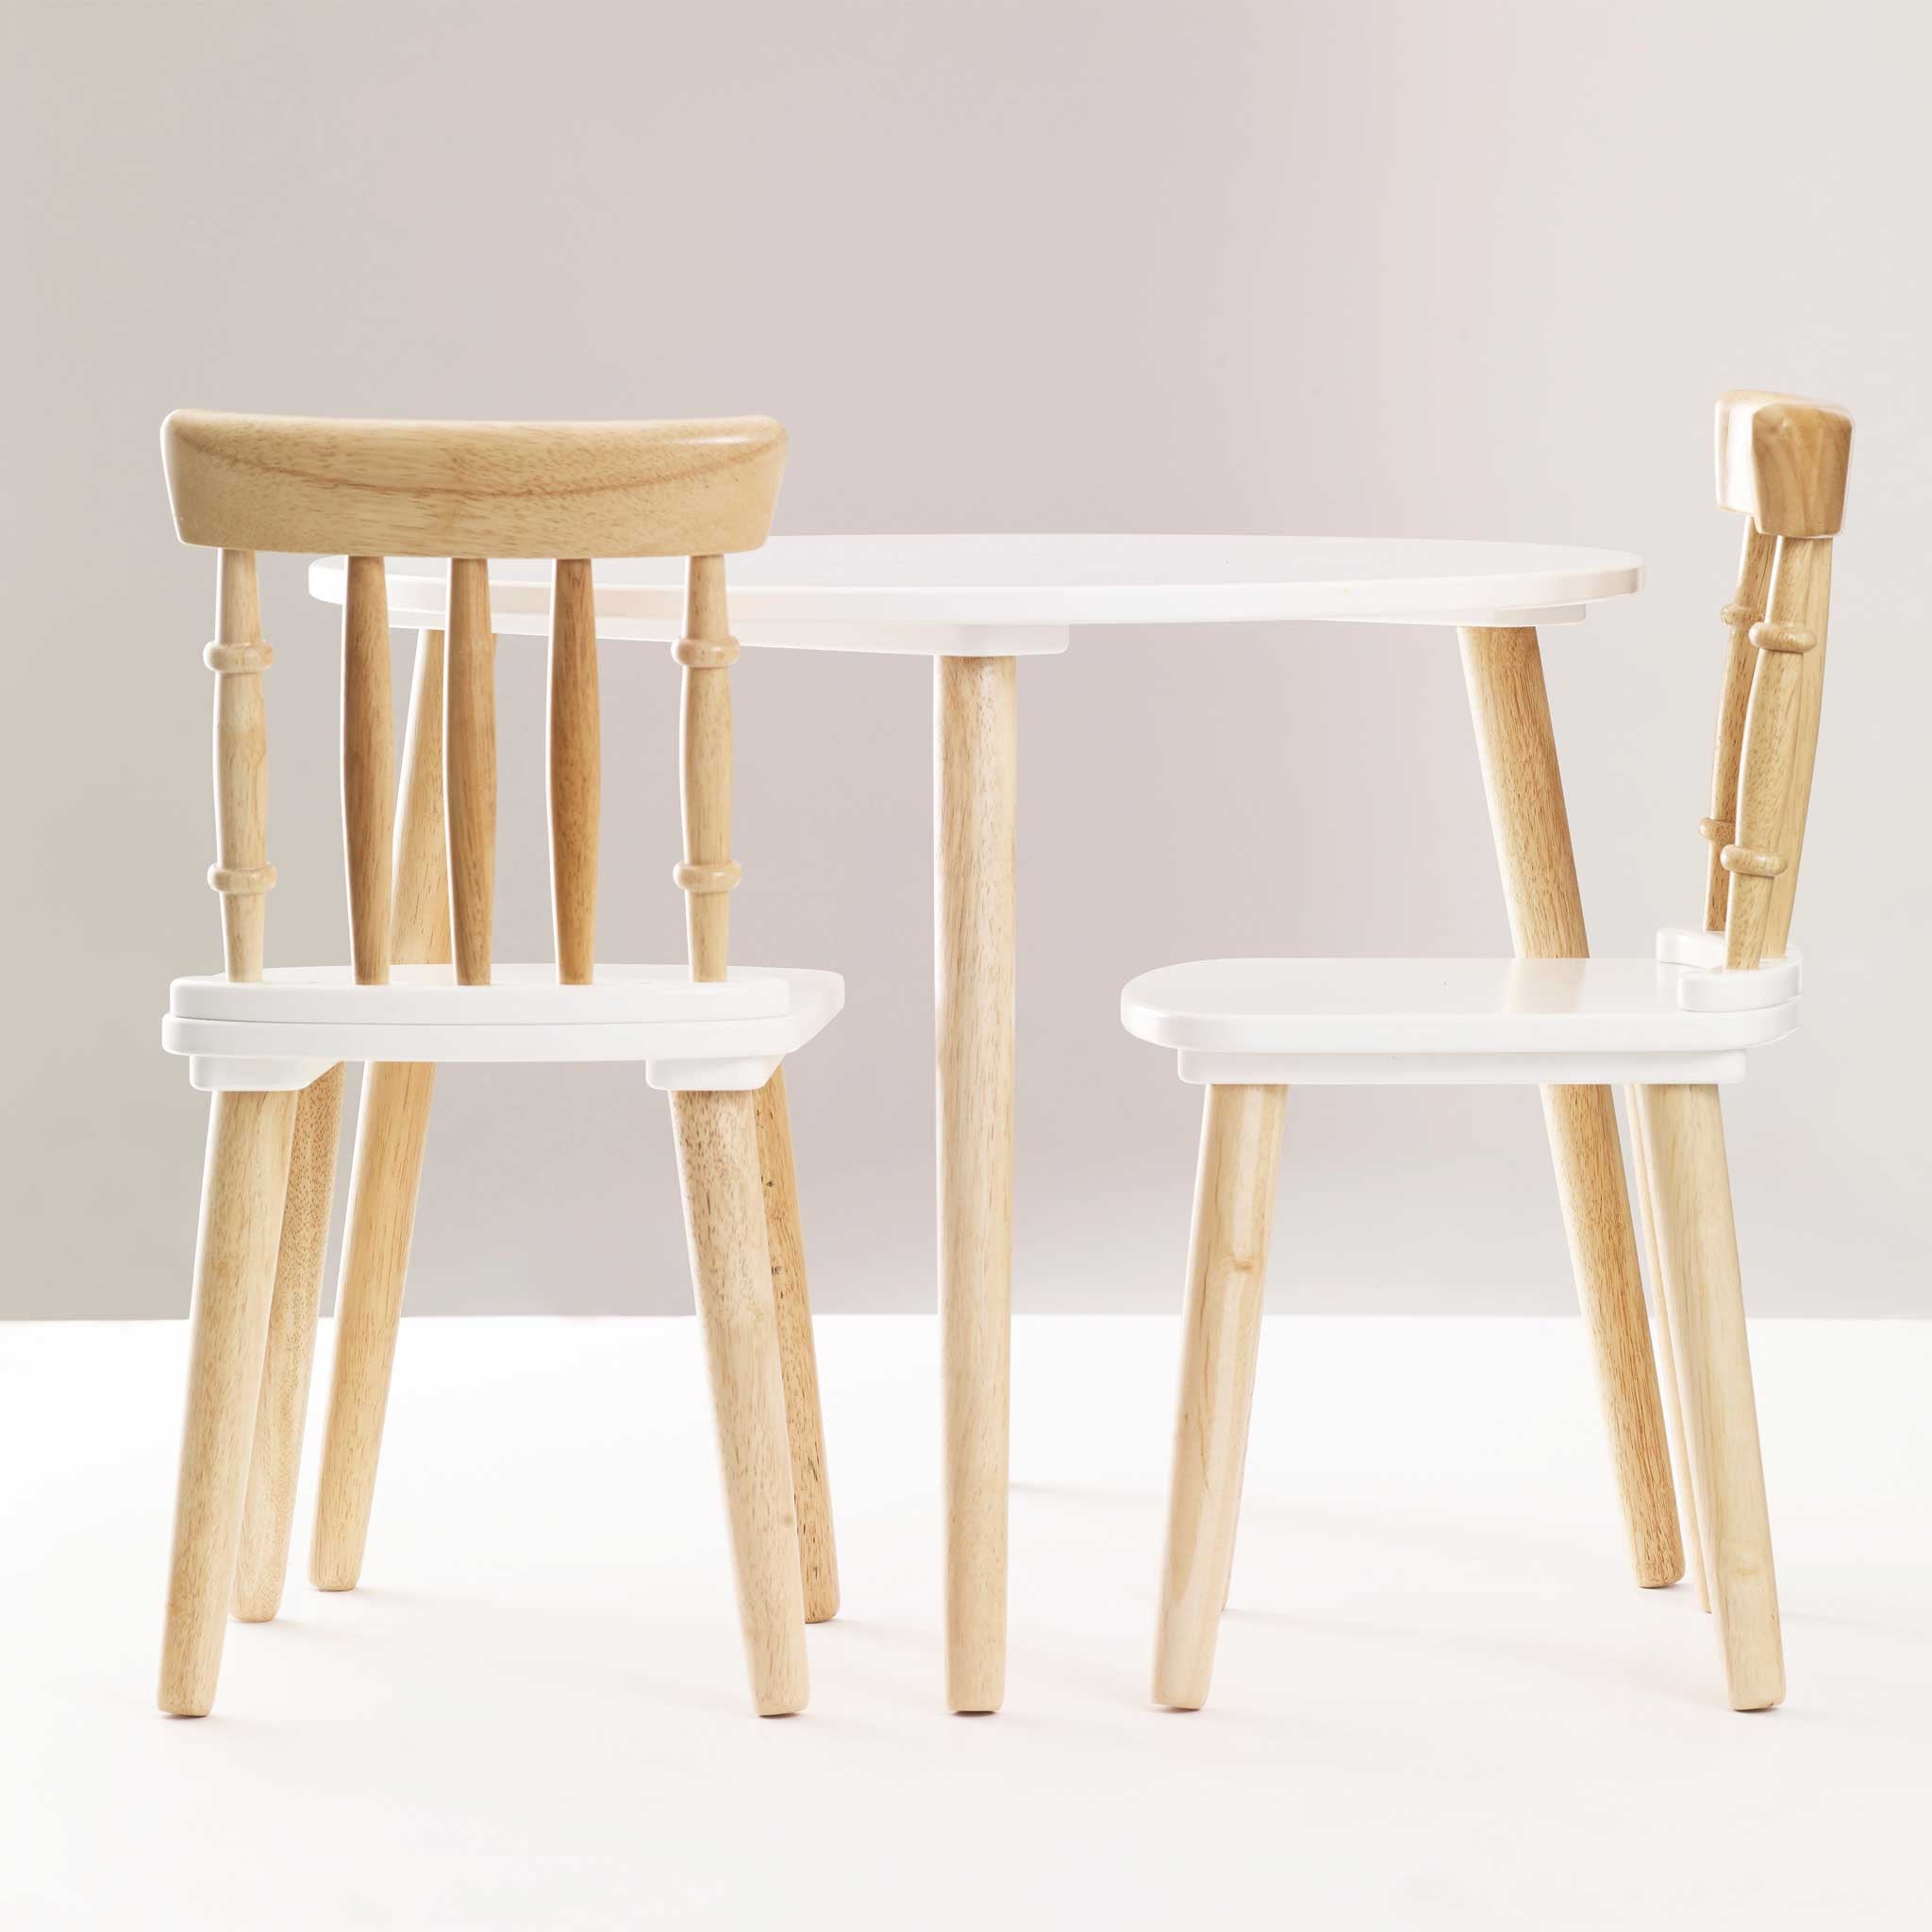 Children's Wooden Table and Chairs